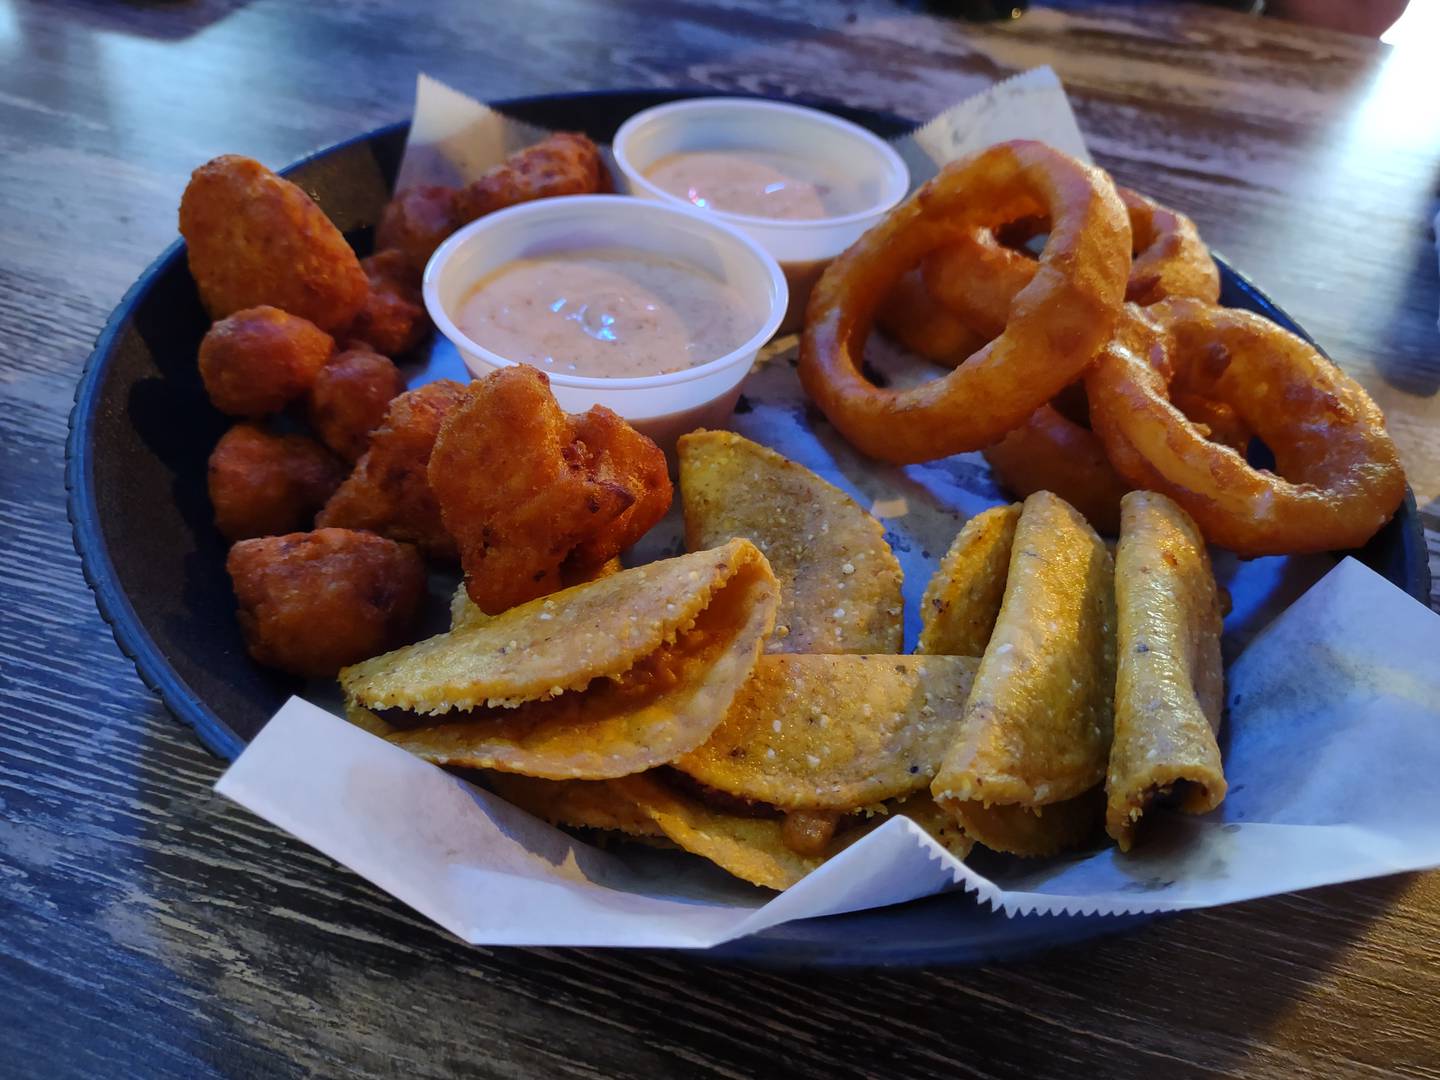 Ziggy's Bar & Grill in downtown Marseilles offers more than a dozen appetizers. One option is the Pick Three, which lets diners choose among fries, tater tots, fried green beans, mini tacos, onion rings, pickle fries, deep-fried mushrooms and spicy breaded cauliflower.